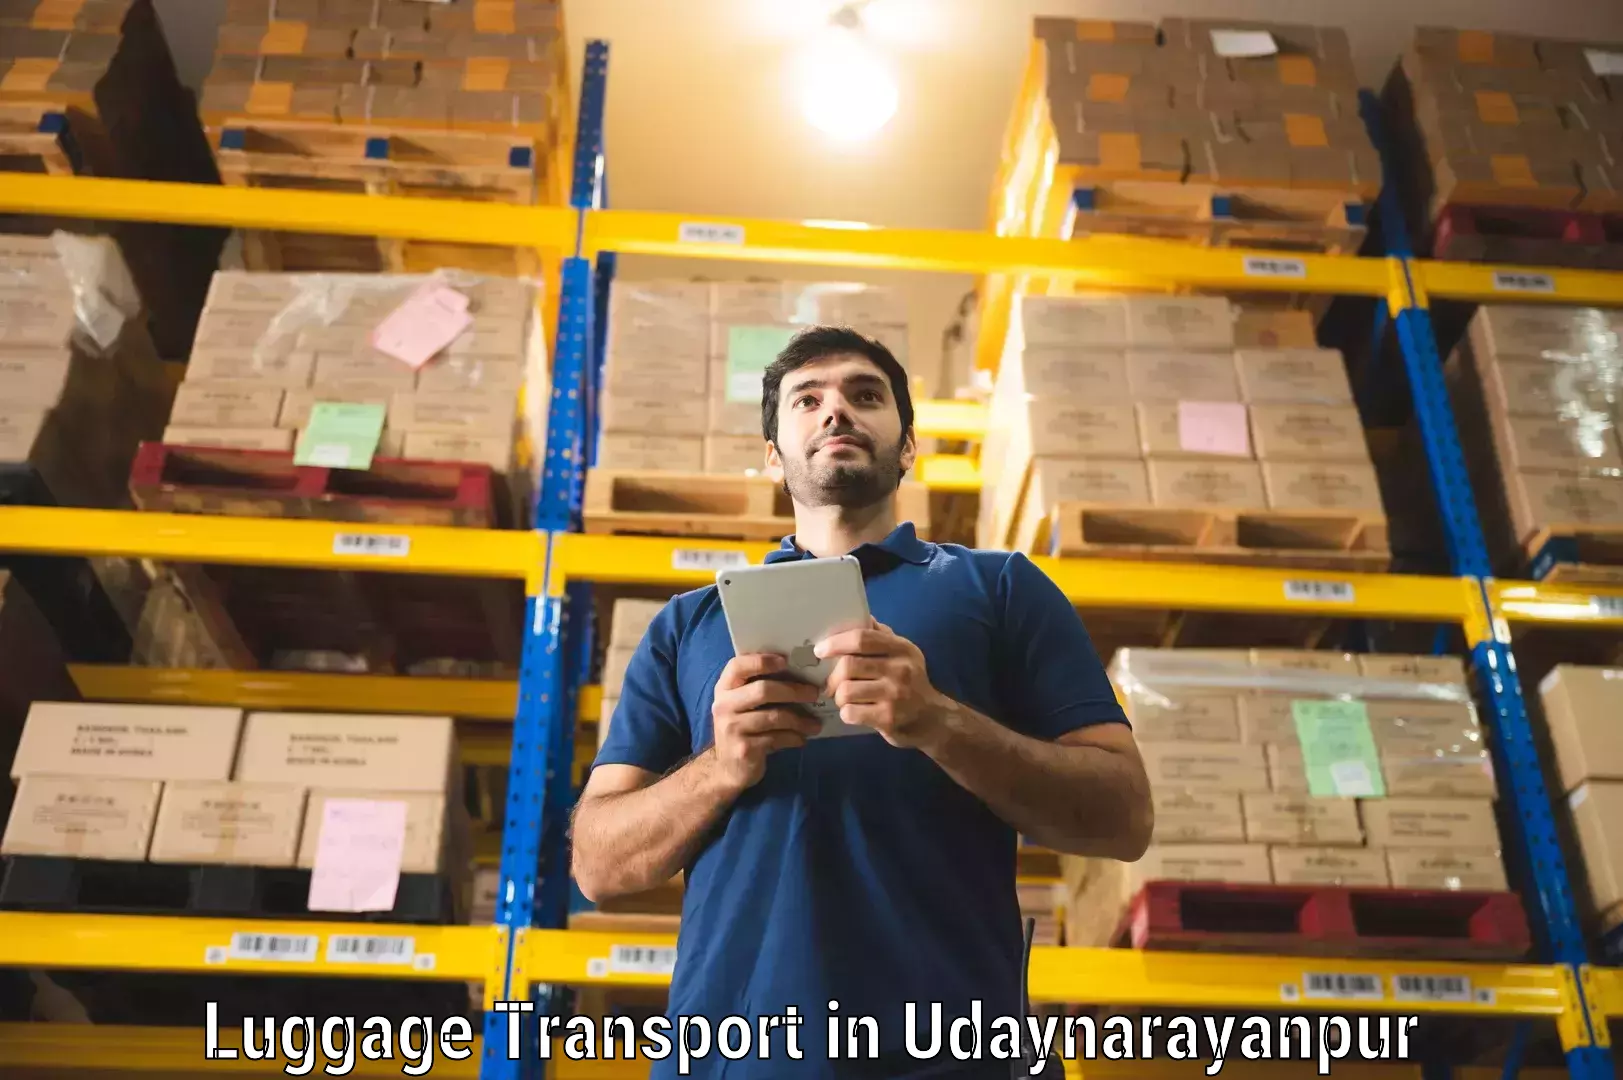 Baggage transport professionals in Udaynarayanpur